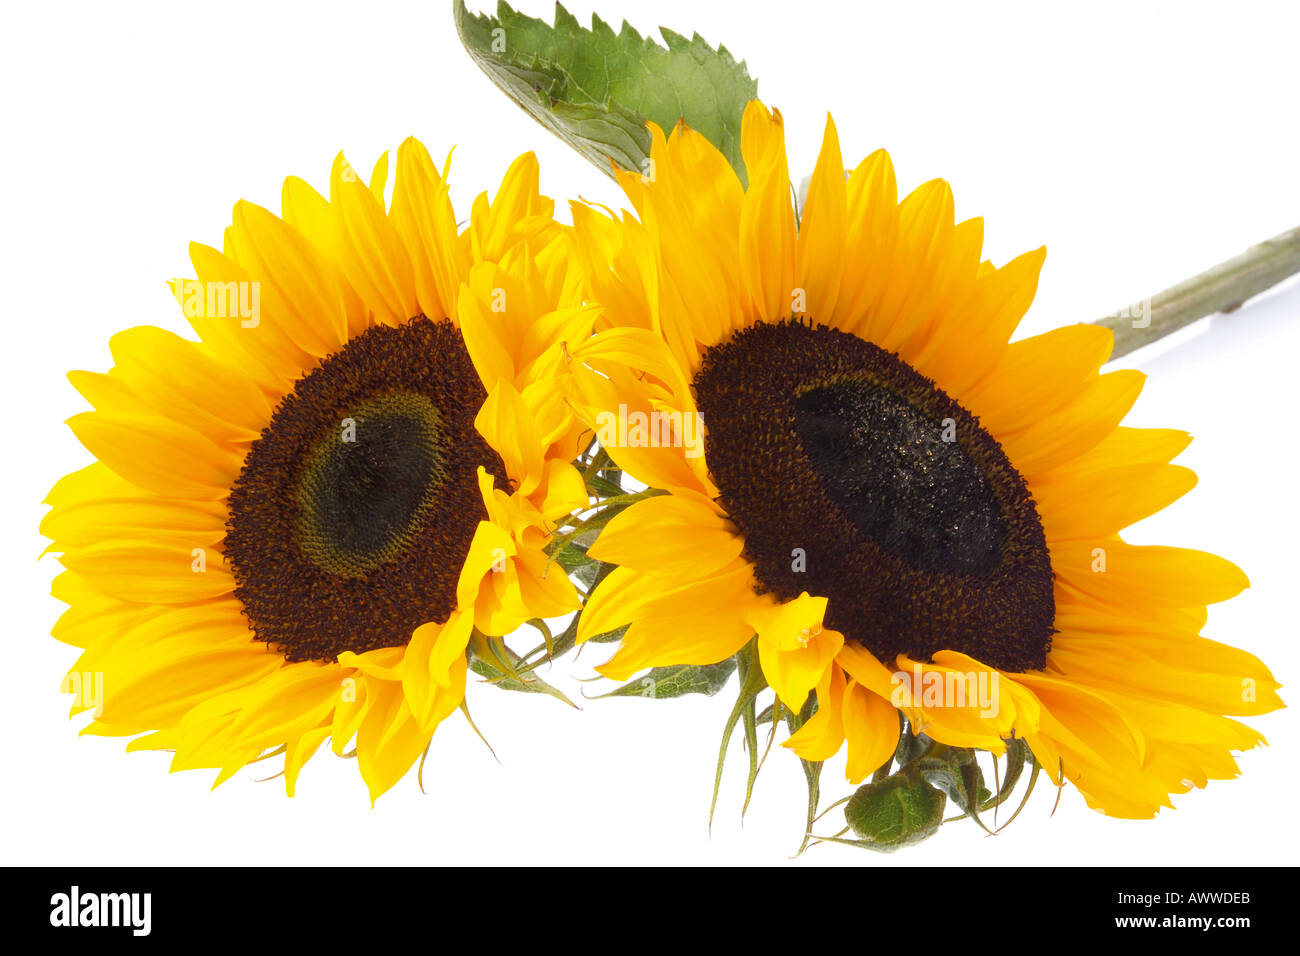 Two sunflowers (Helianthus annuus), close-up Stock Photo